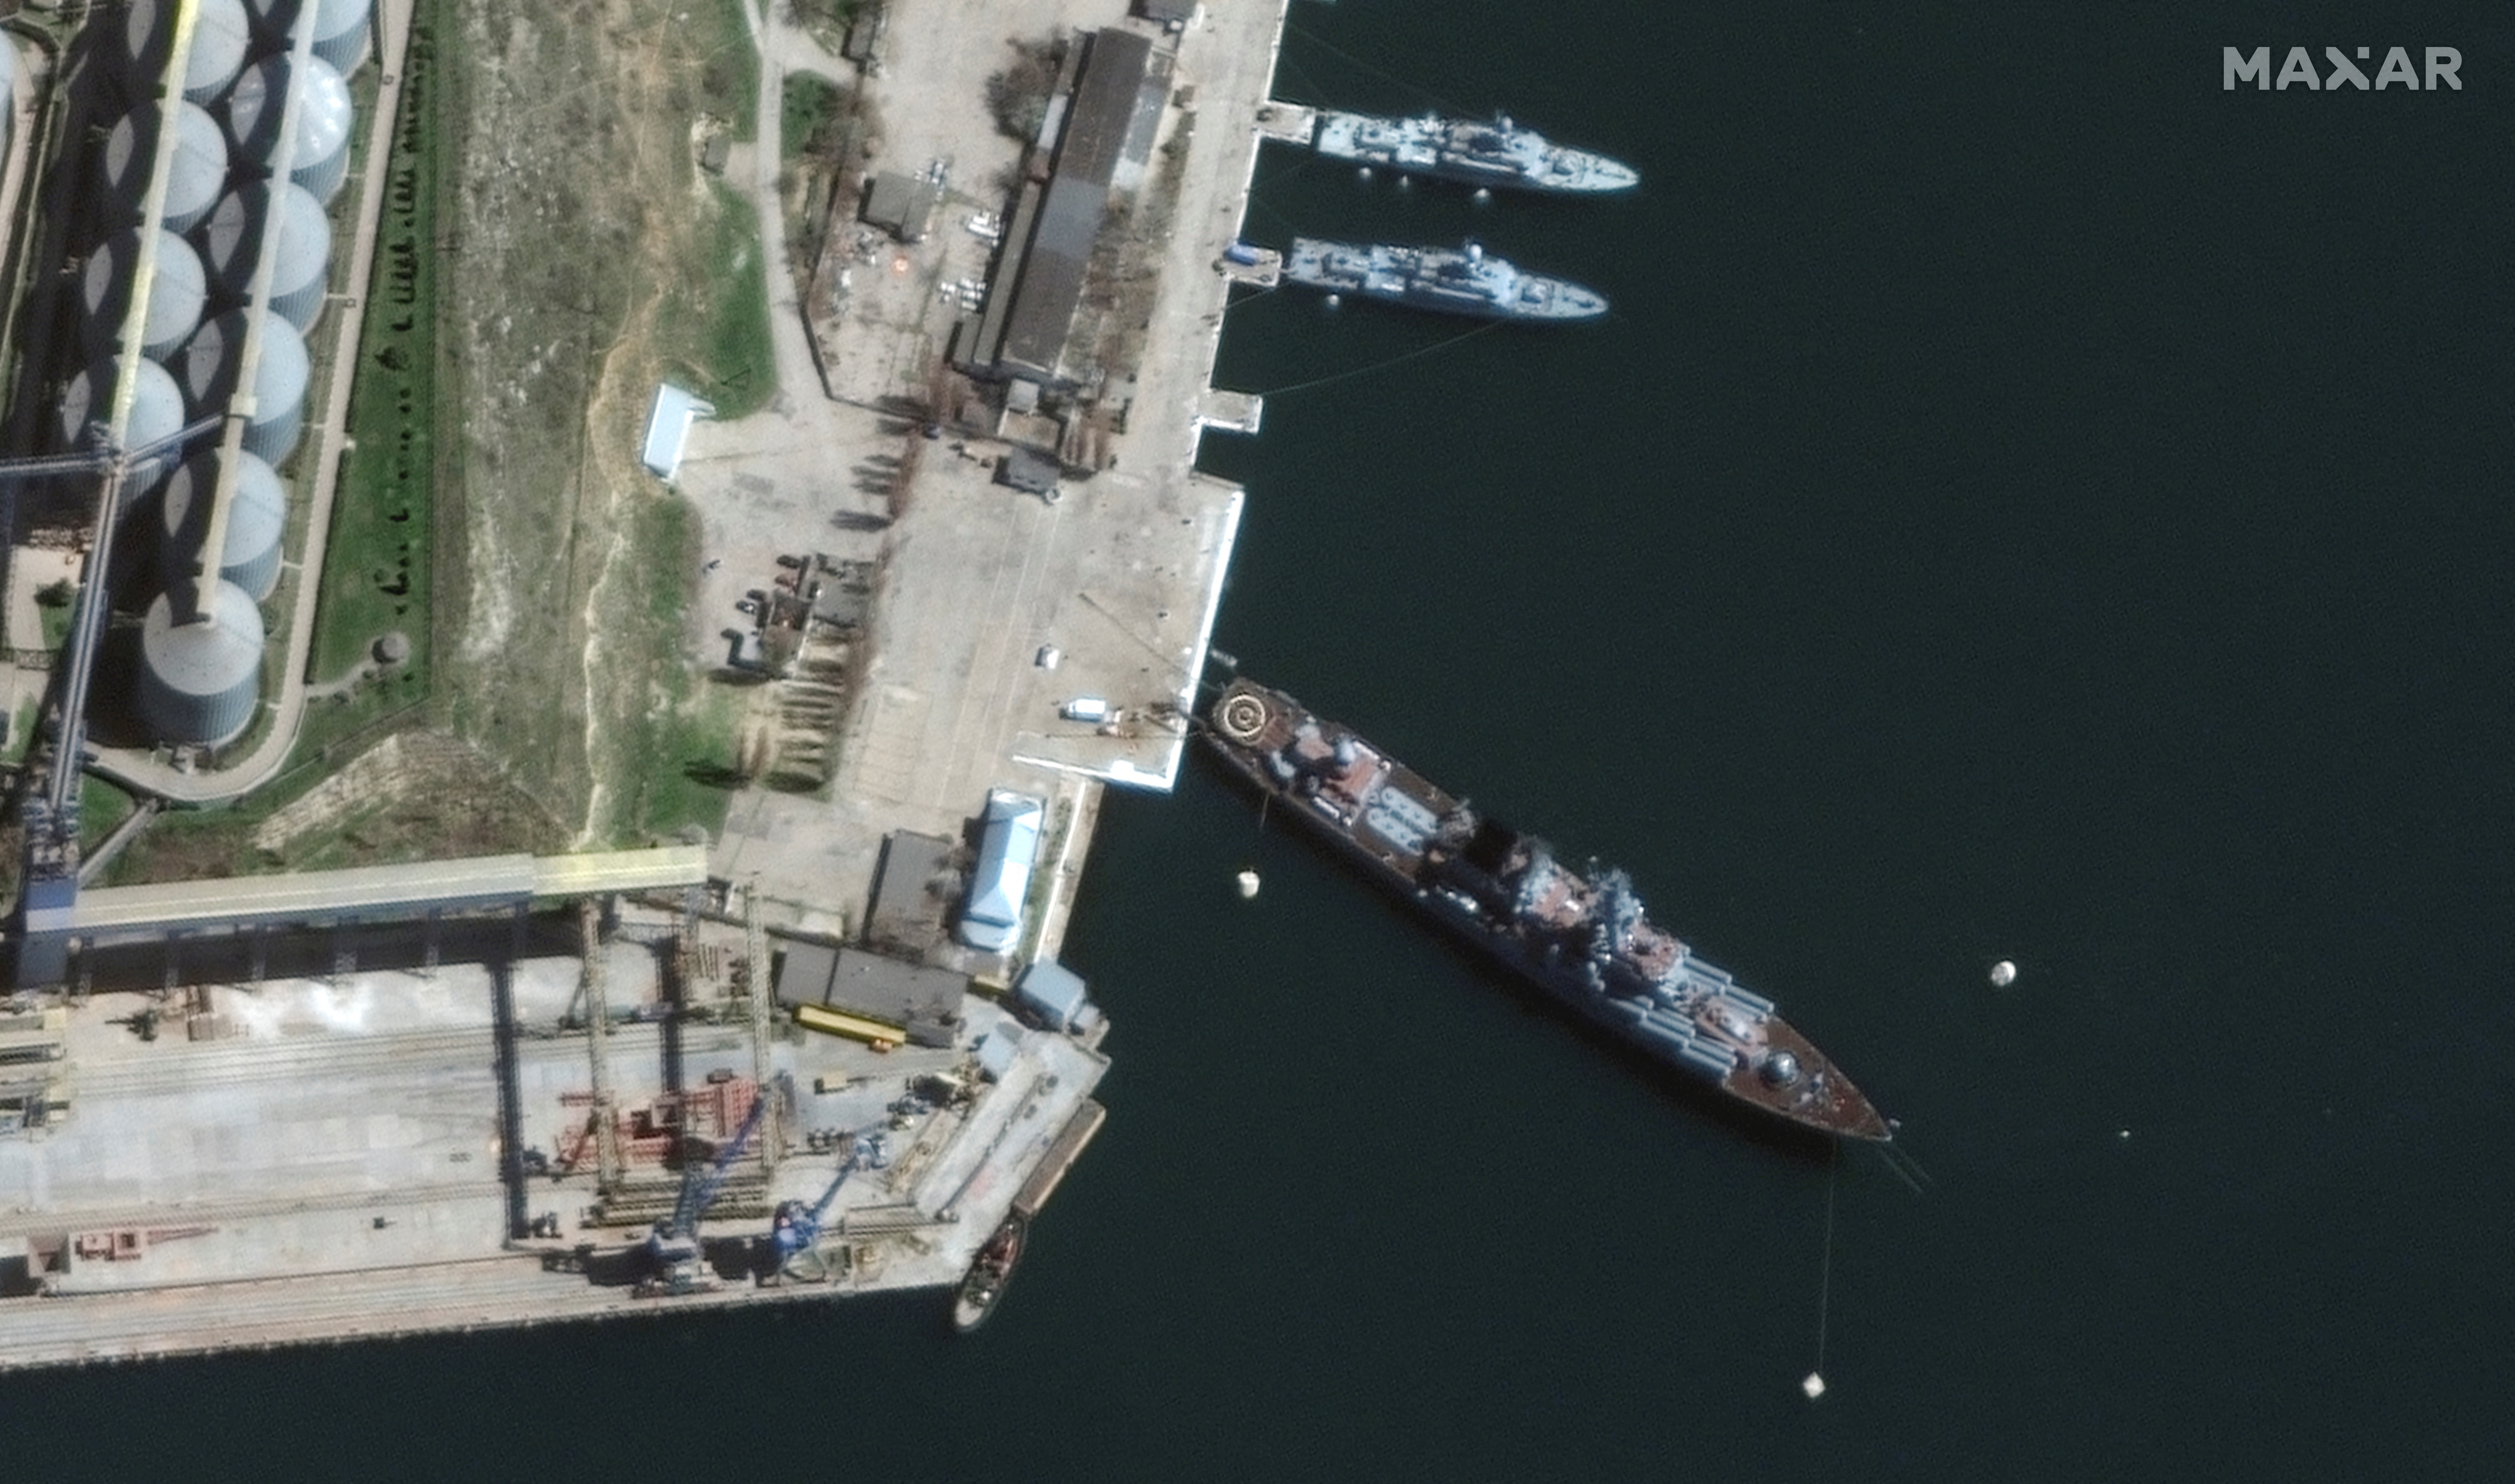 A satellite image shows a view of Russian Navy's guided missile cruiser Moskva at port, in Sevastopol